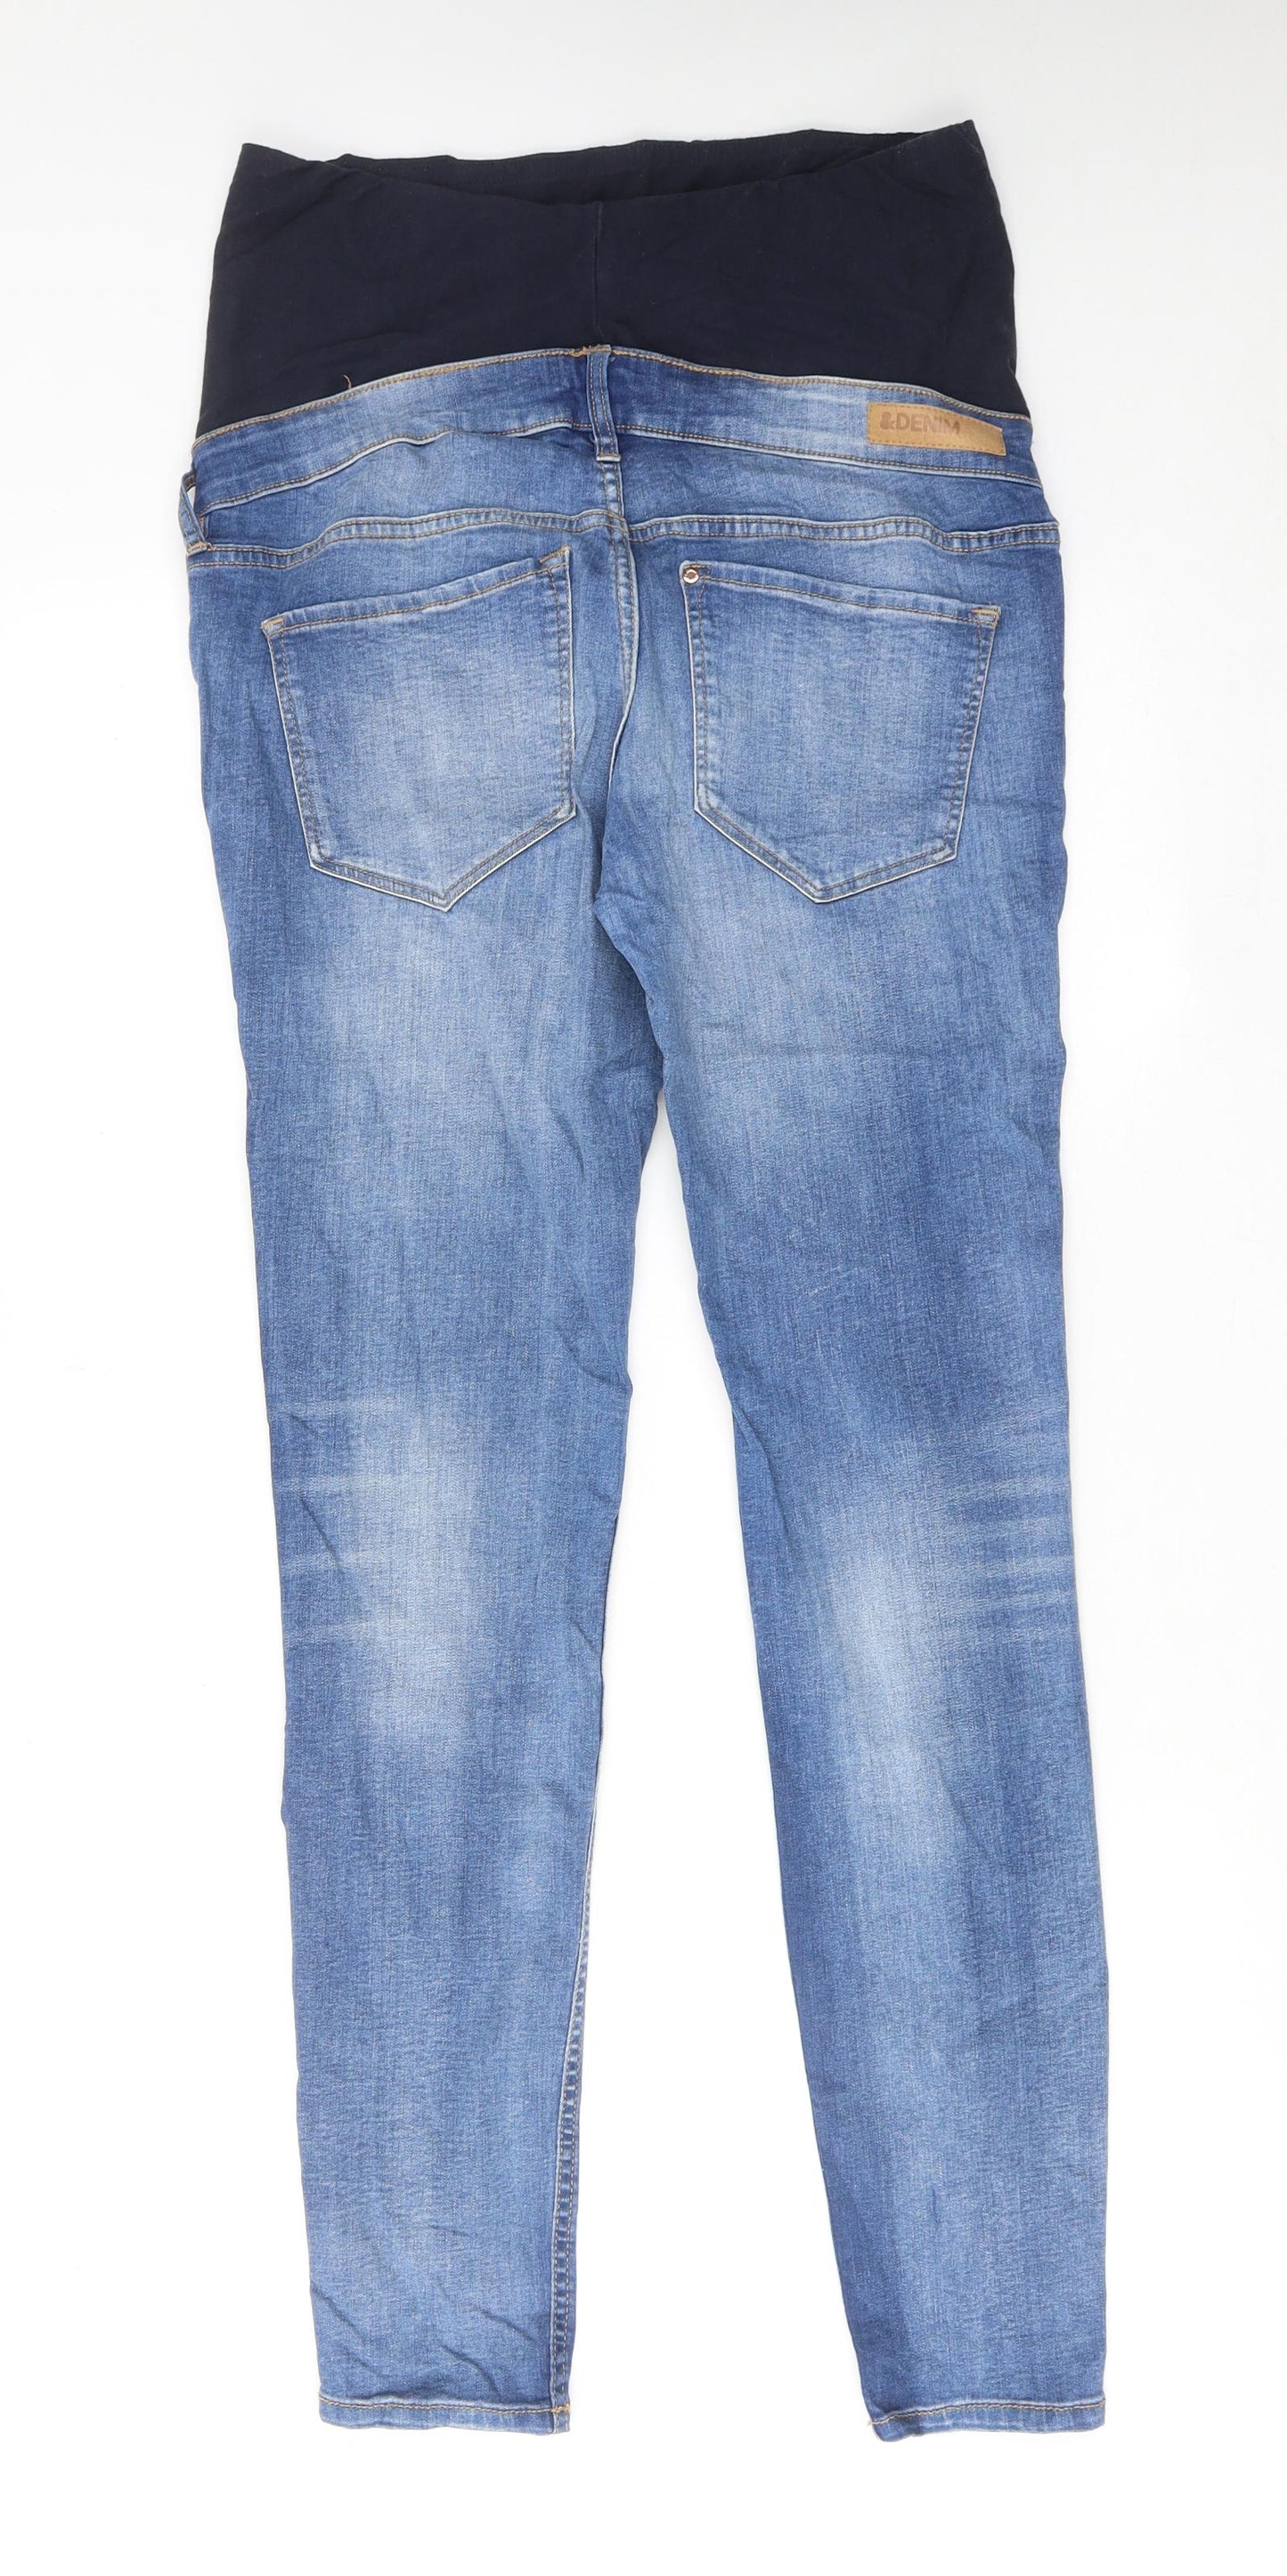 H&M Womens Blue Cotton Skinny Jeans Size 14 Regular Button